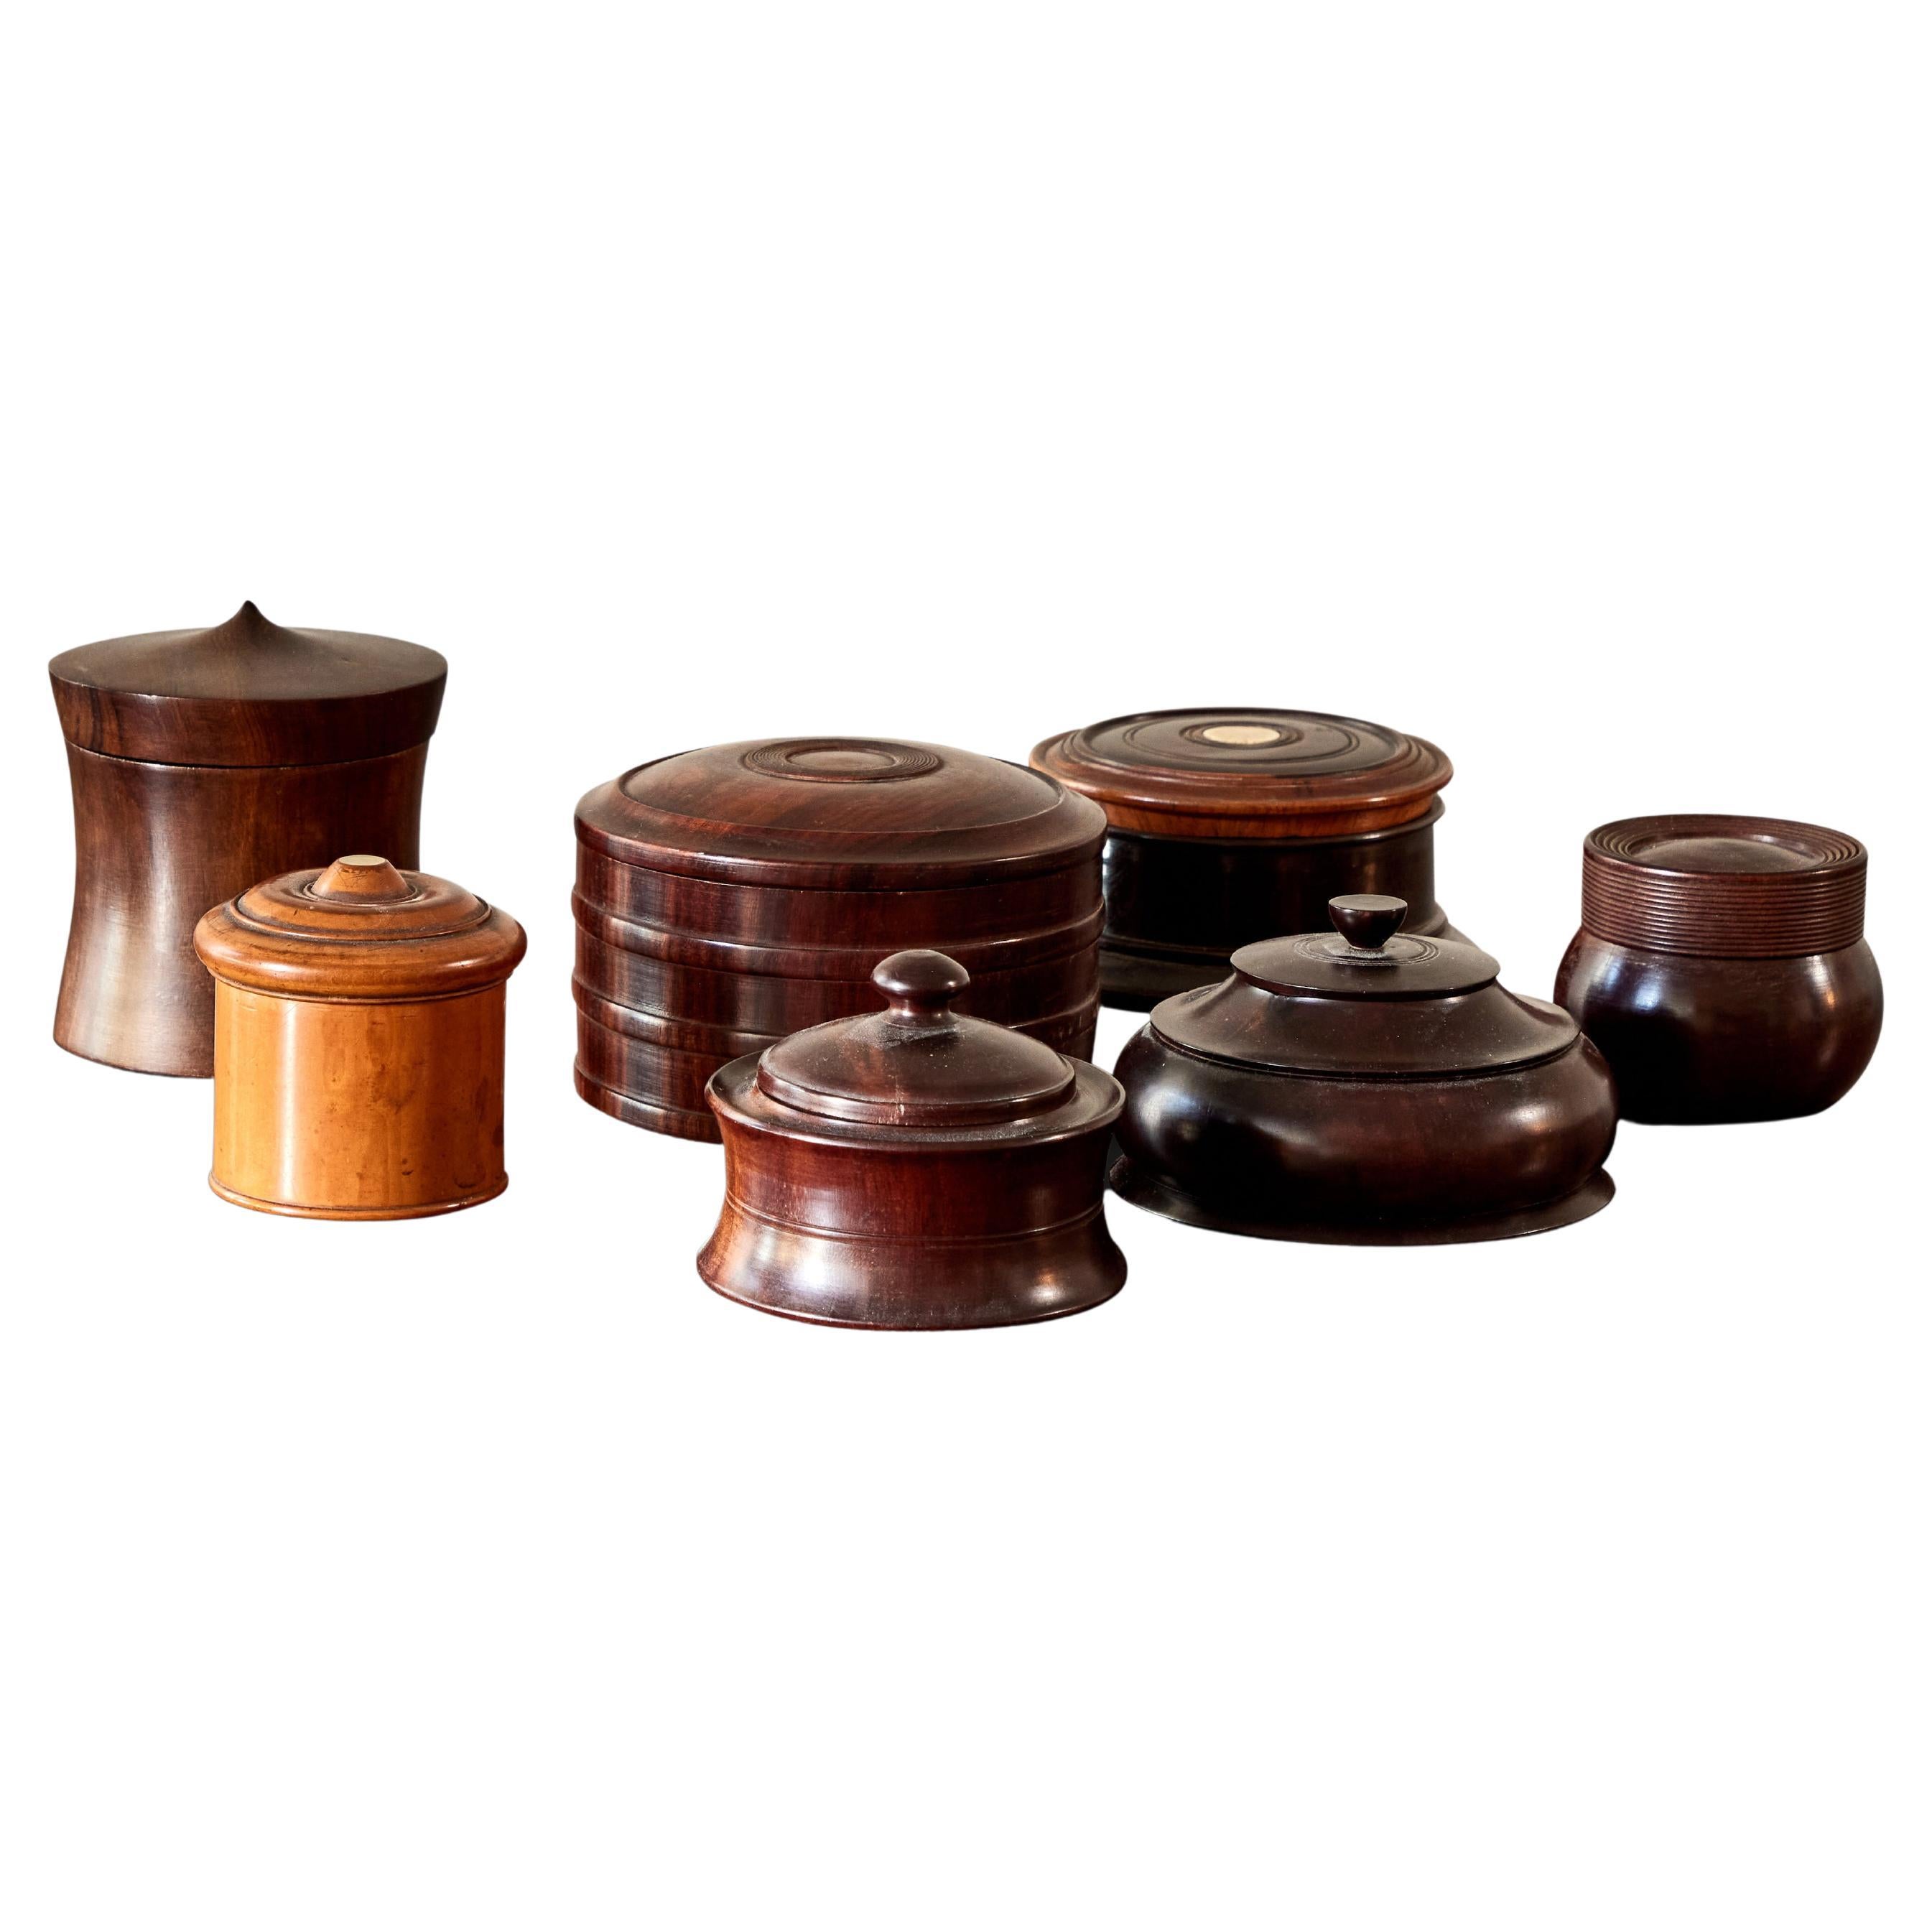 Collection of five spherical wooden boxes from late 19th-century. The beautiful variations in tone, beveling and scale make this a unique collection to display altogether, though due to the exceptional quality of each box individually, would also